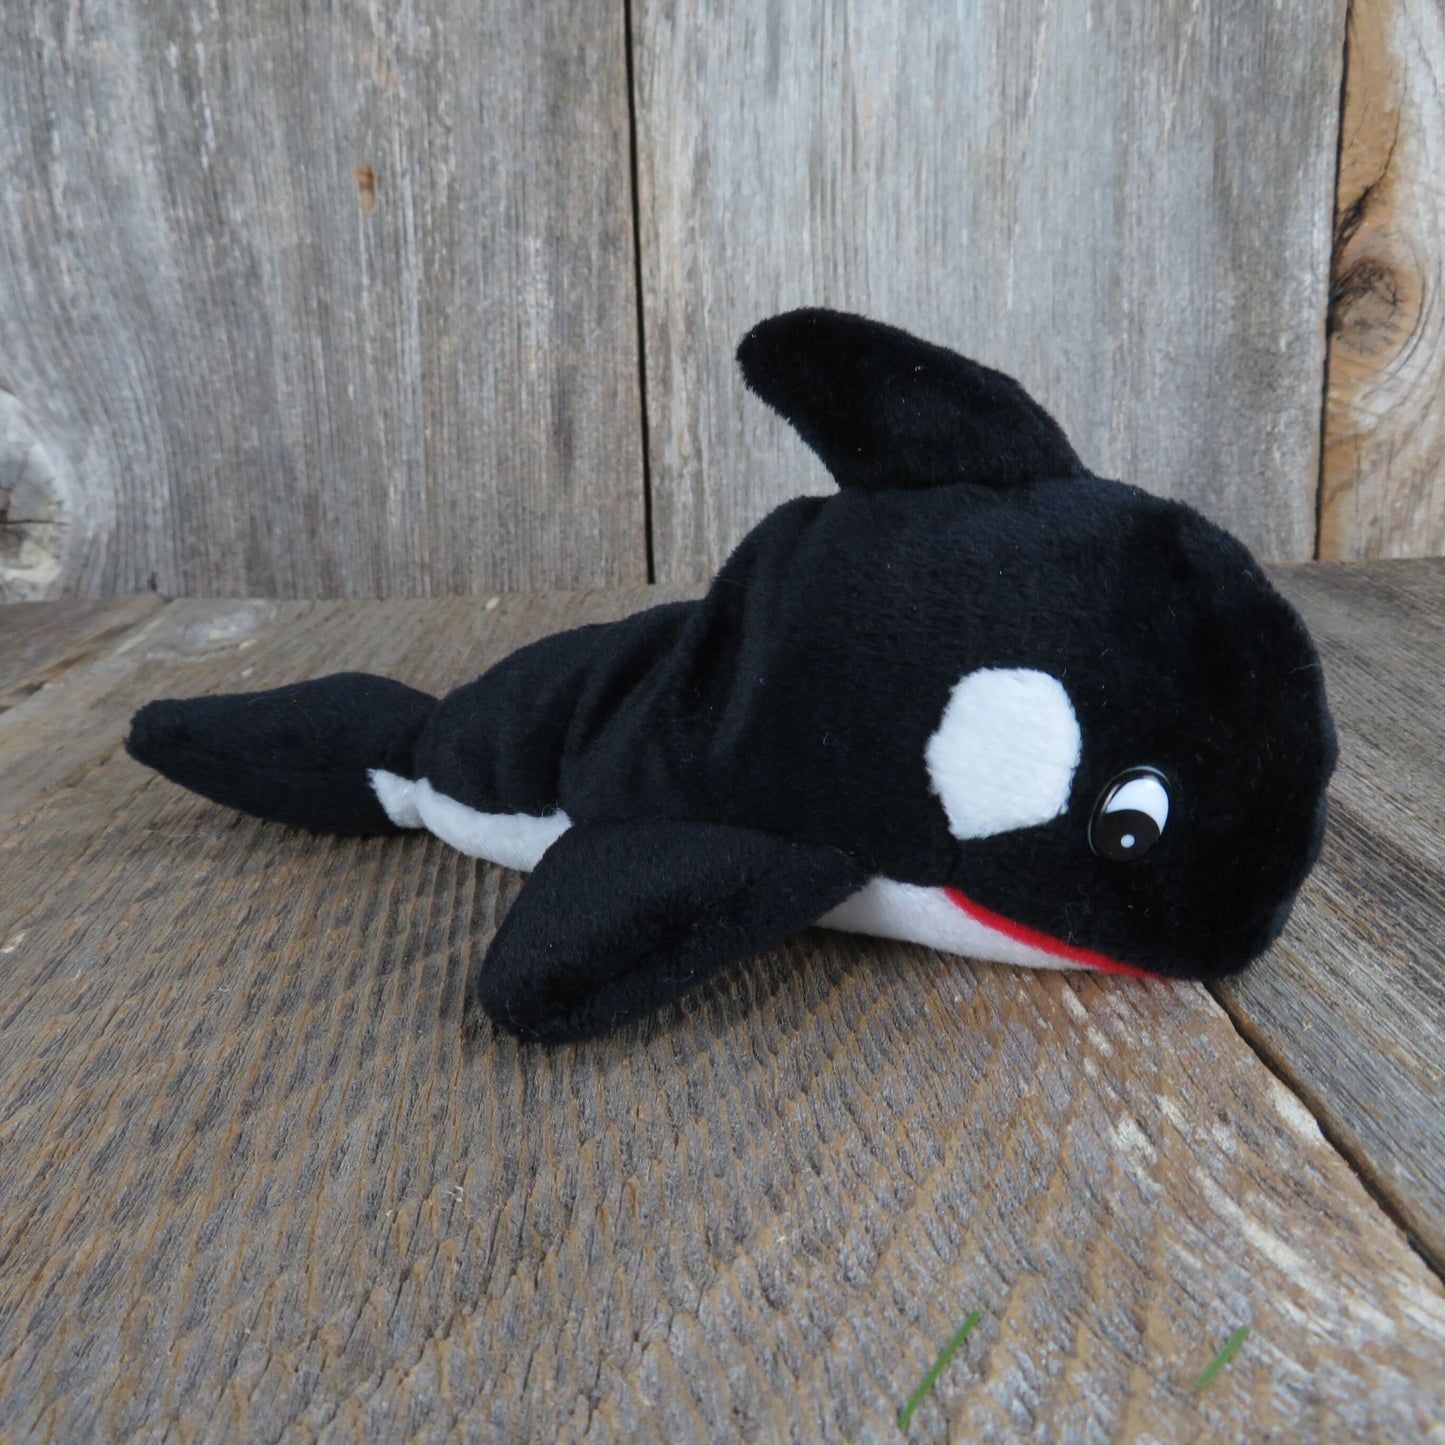 Whale Plush Orca Killer Whale Stuffed Animal Weighted Imperial Toys Bean Bag Black and White